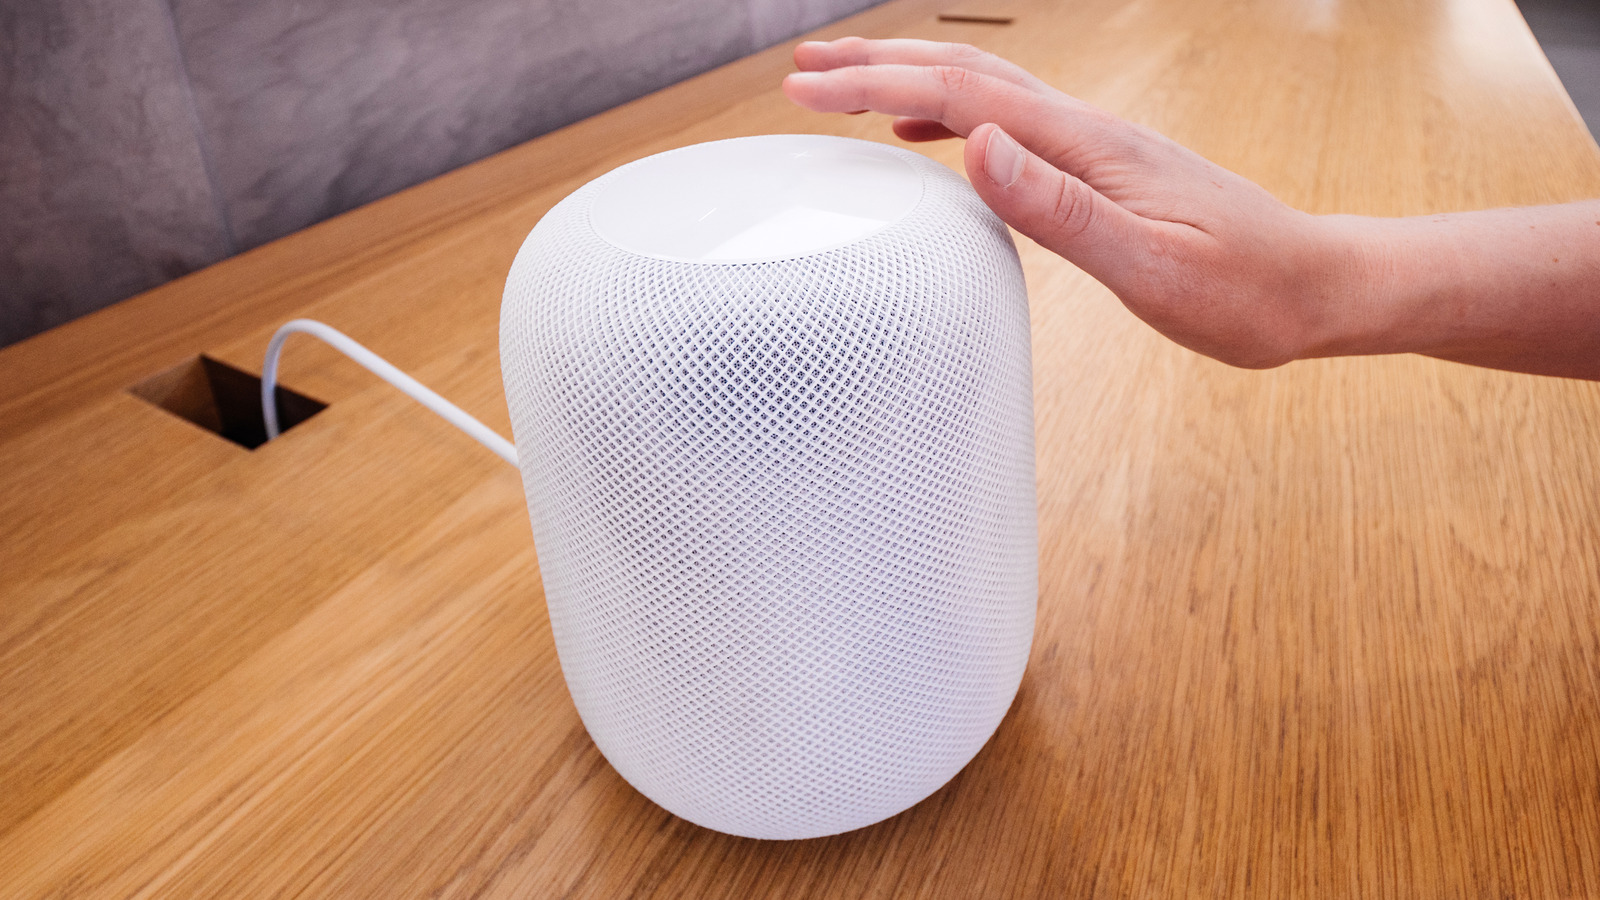 next-homepod-and-apple-watch-may-not-have-the-upgrades-you-want